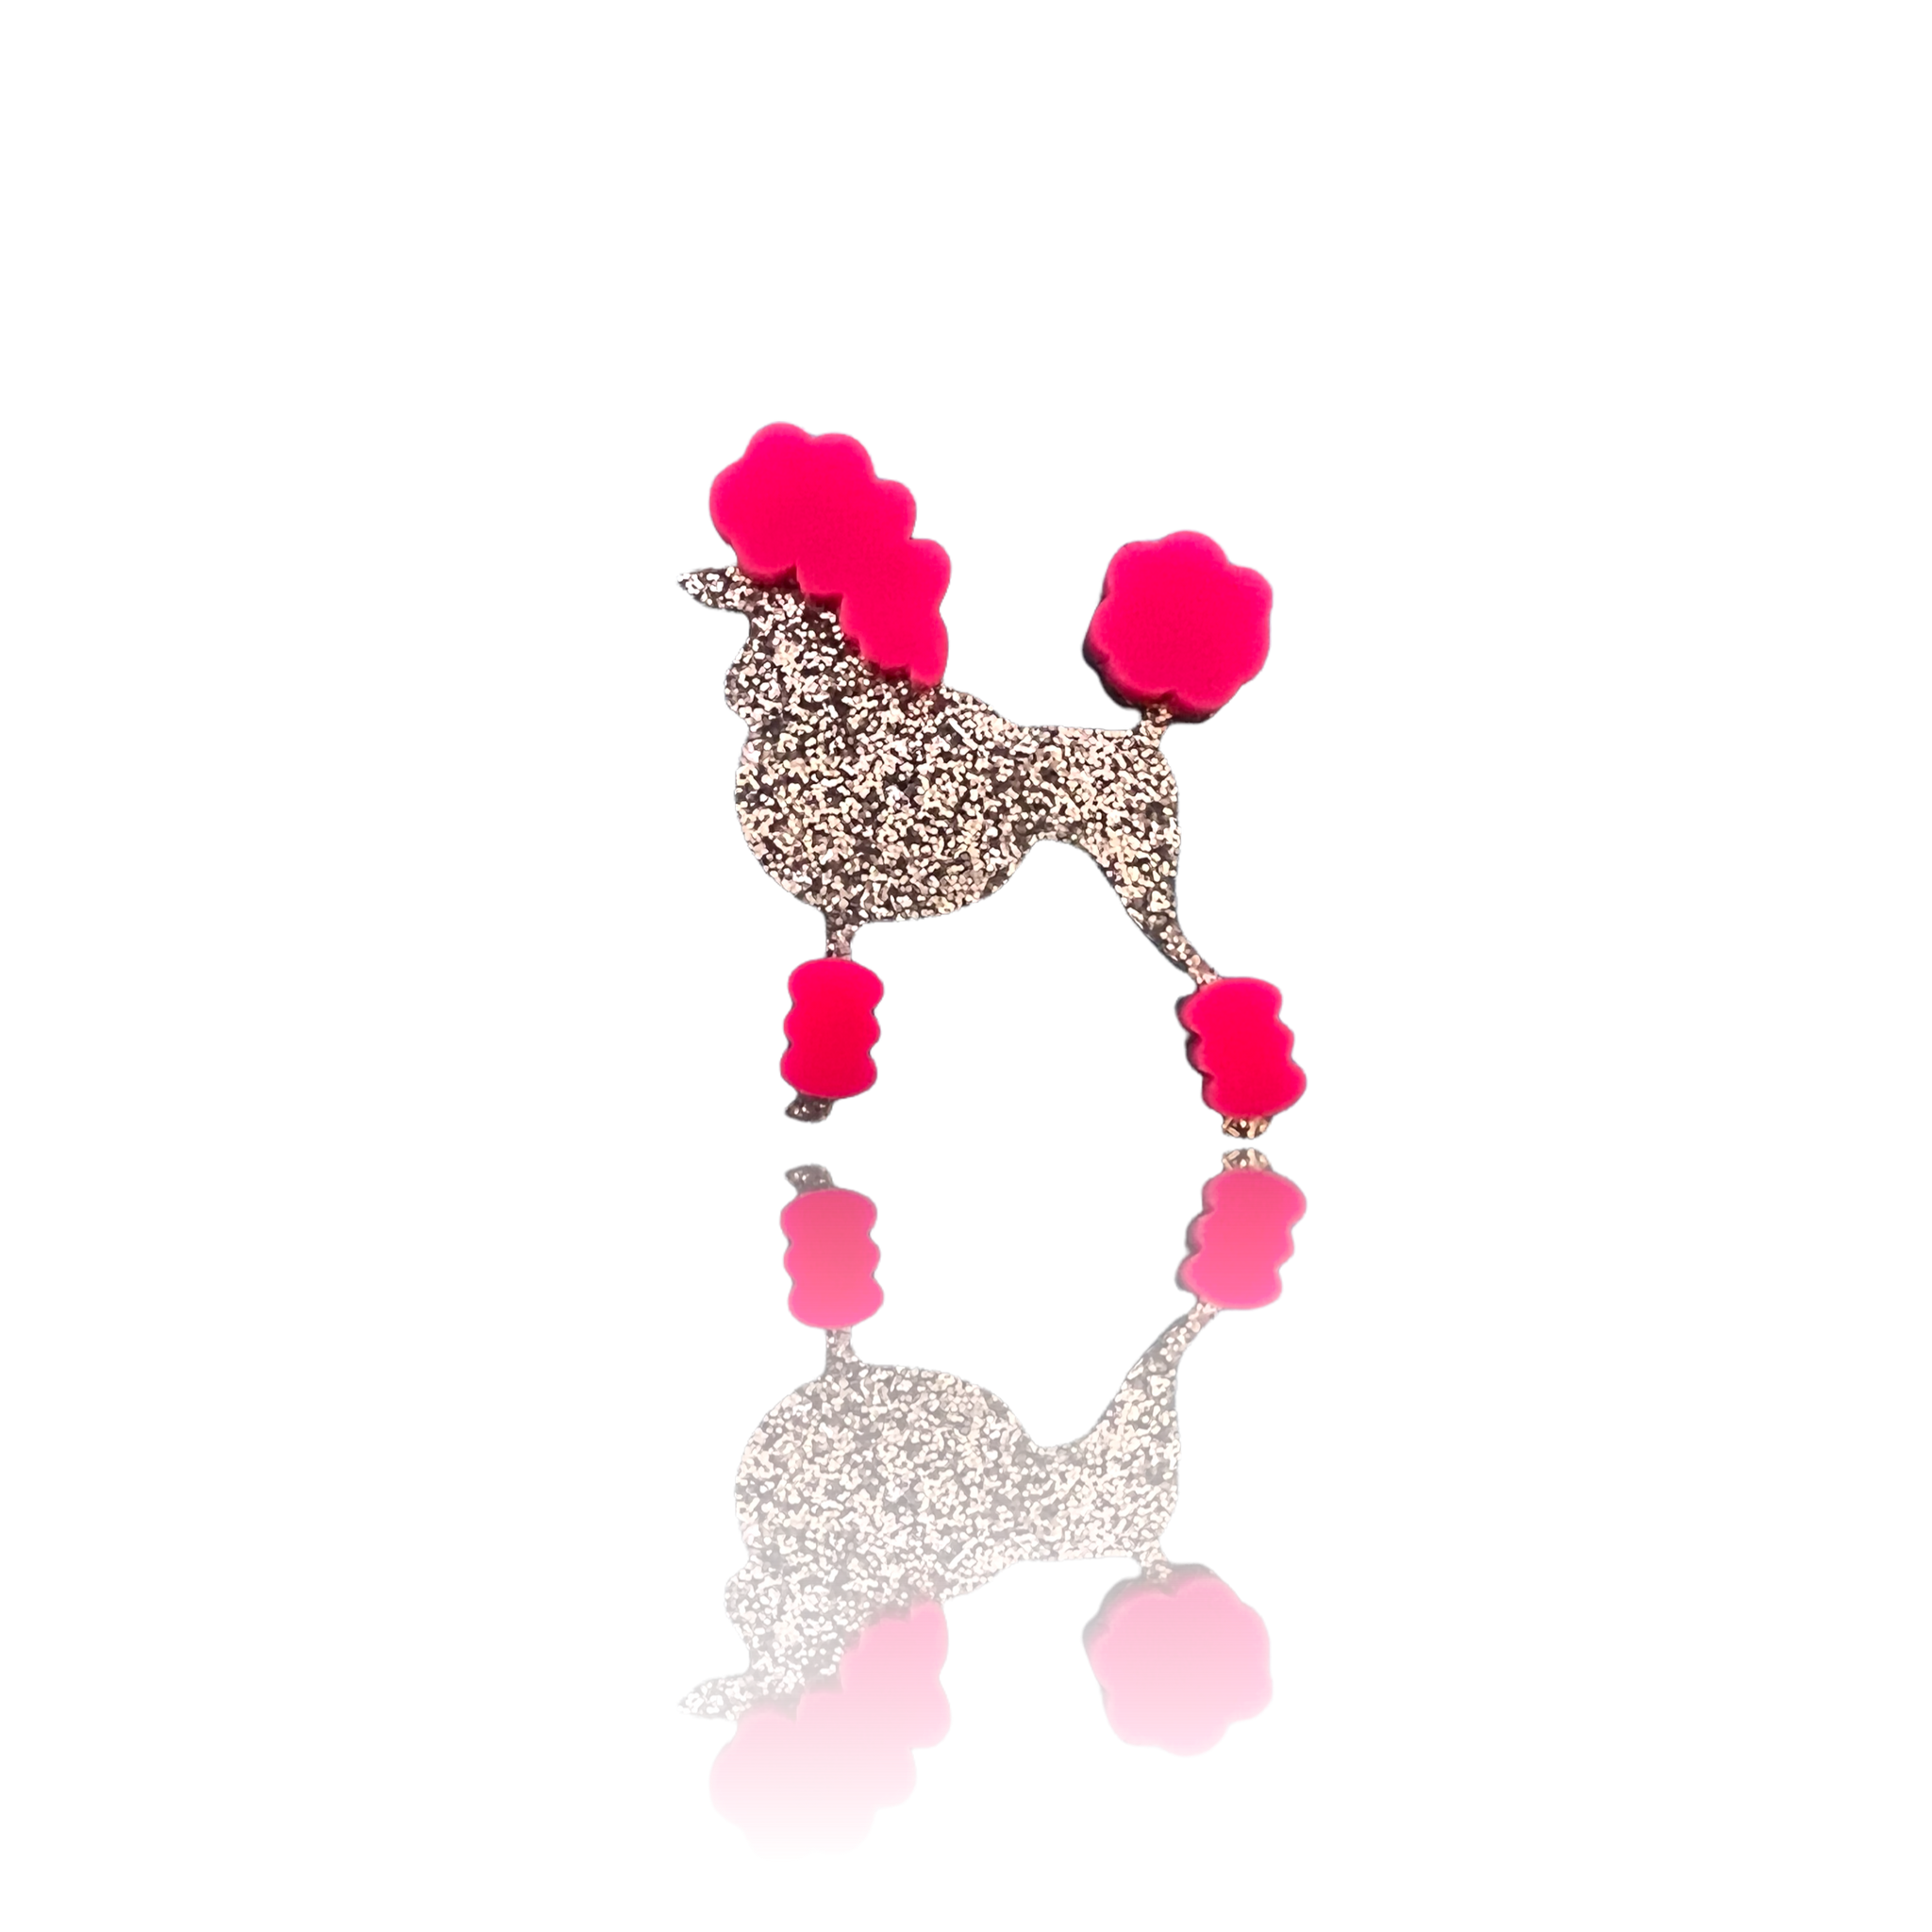 'Cha-Cha' the Poodle Brooch